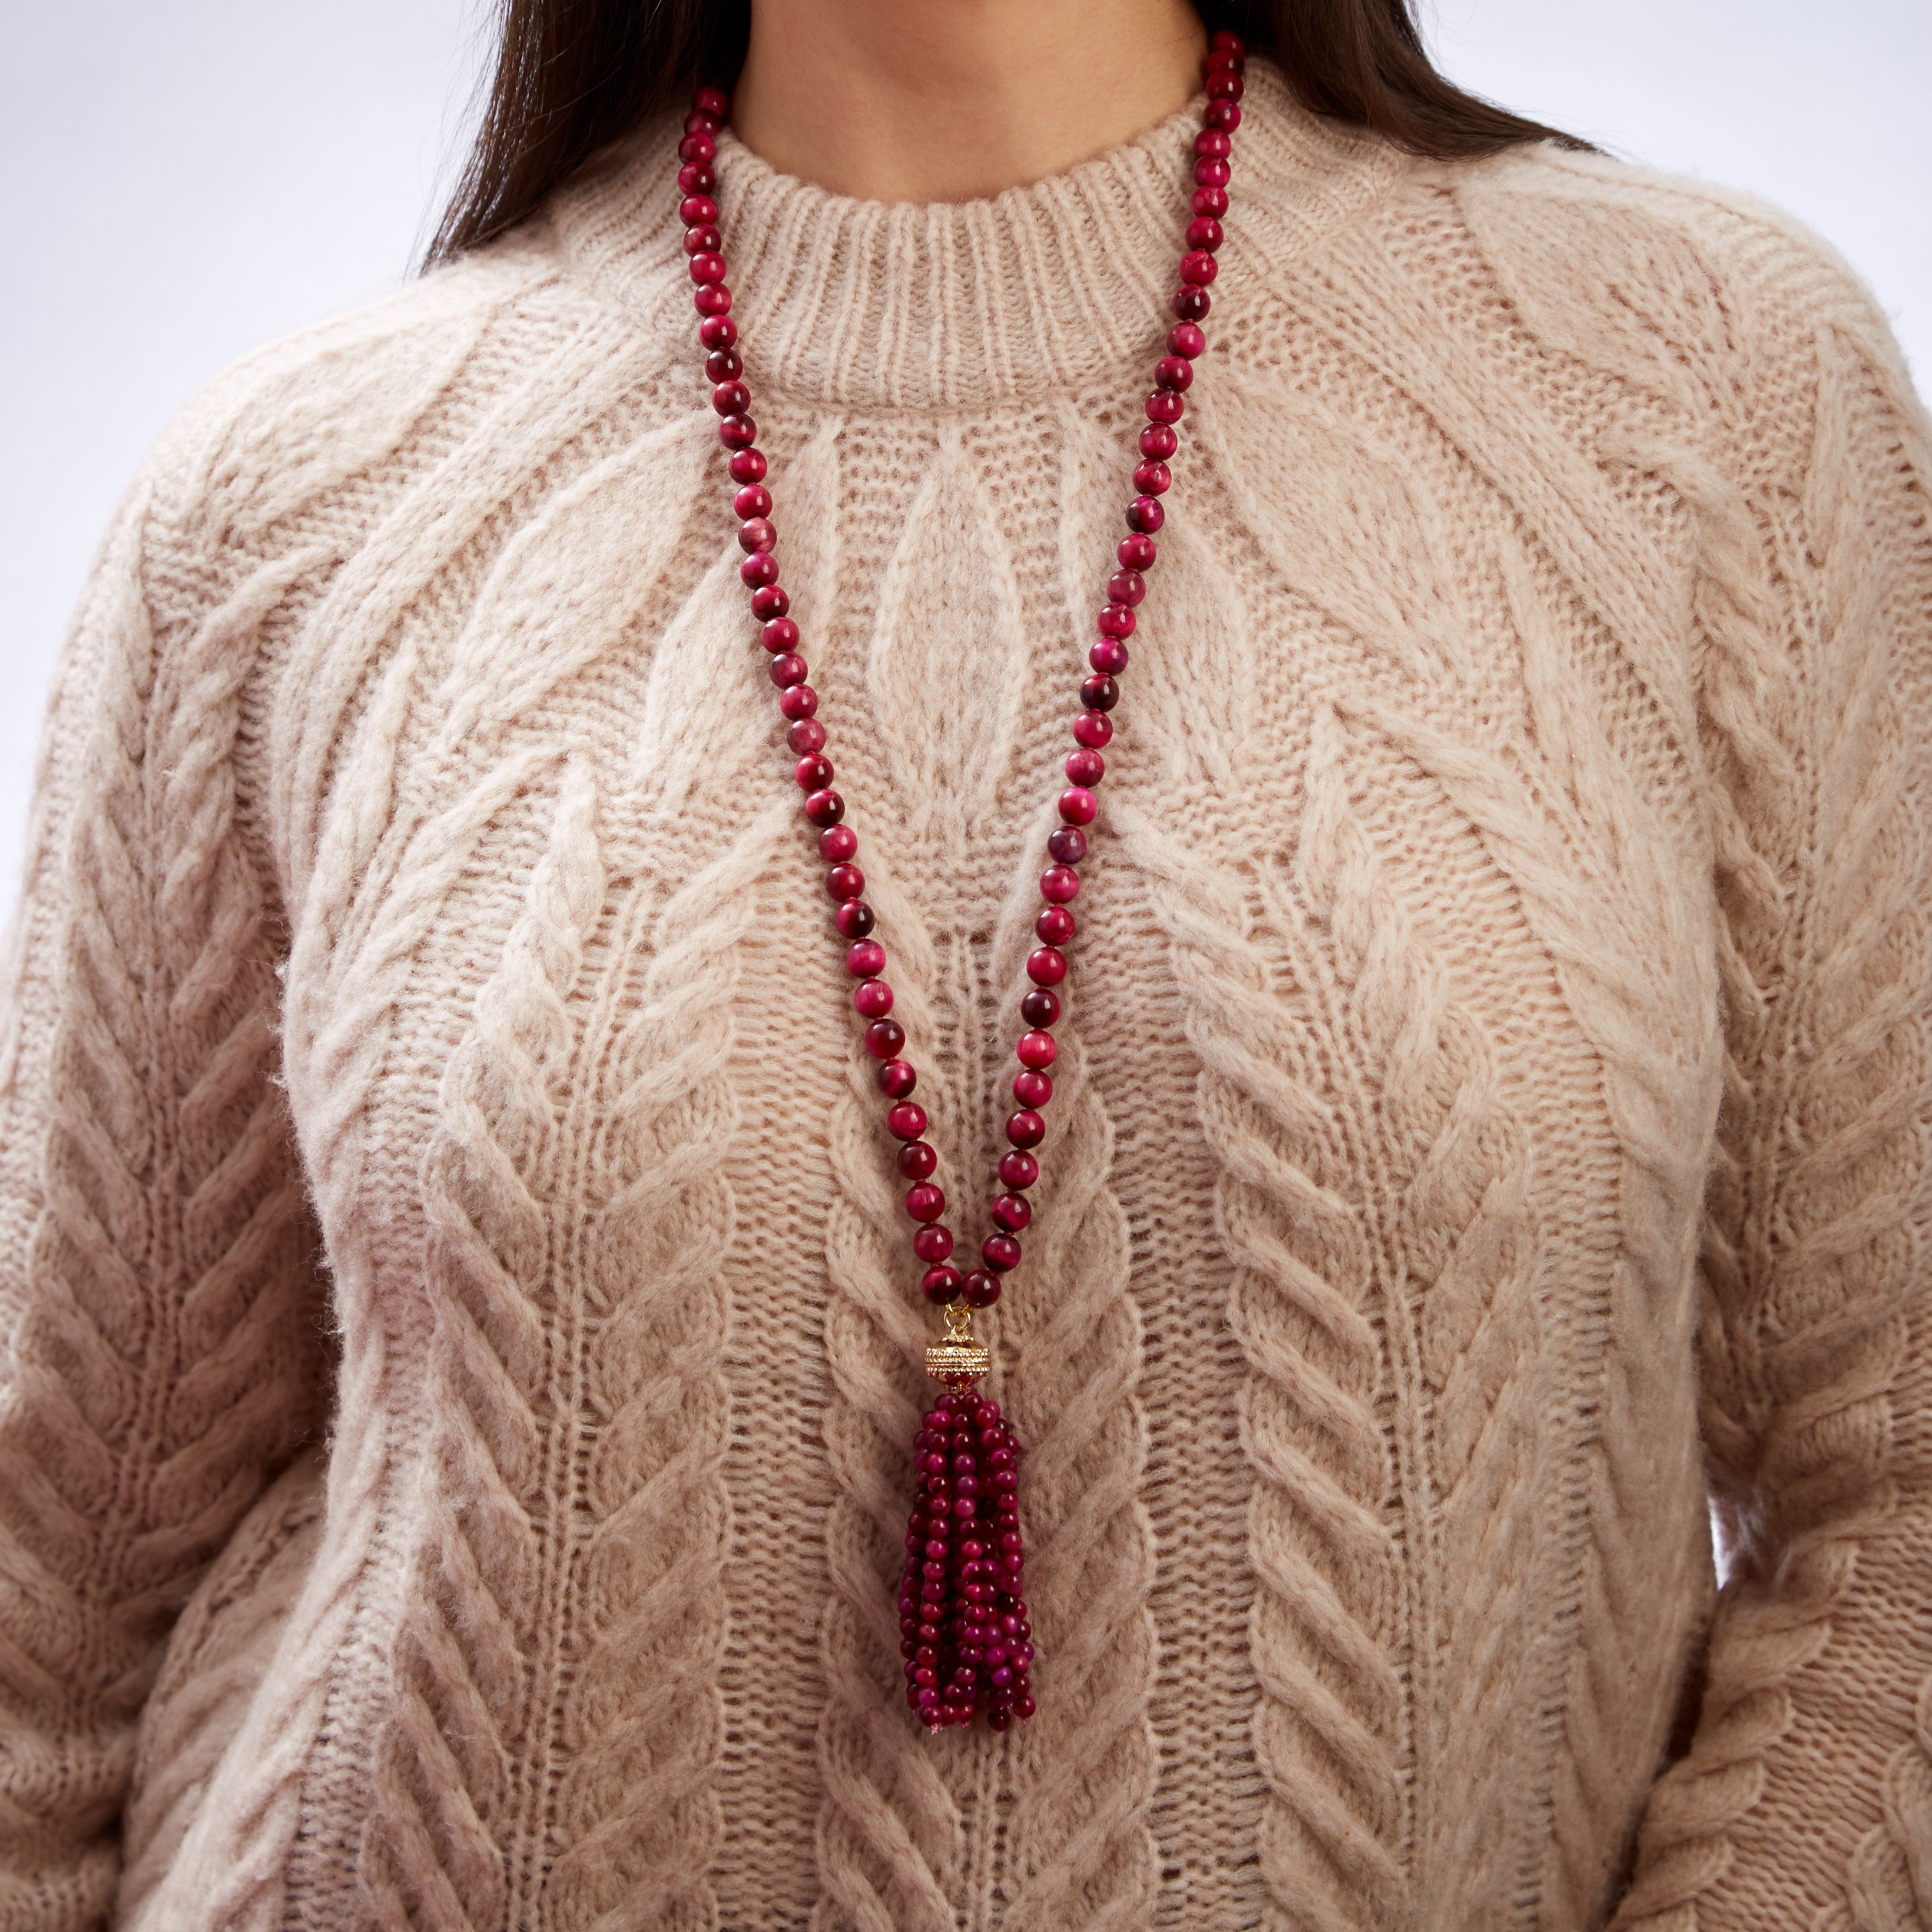 Victoire Pink Tiger's Eye 8mm Double Strand Necklace